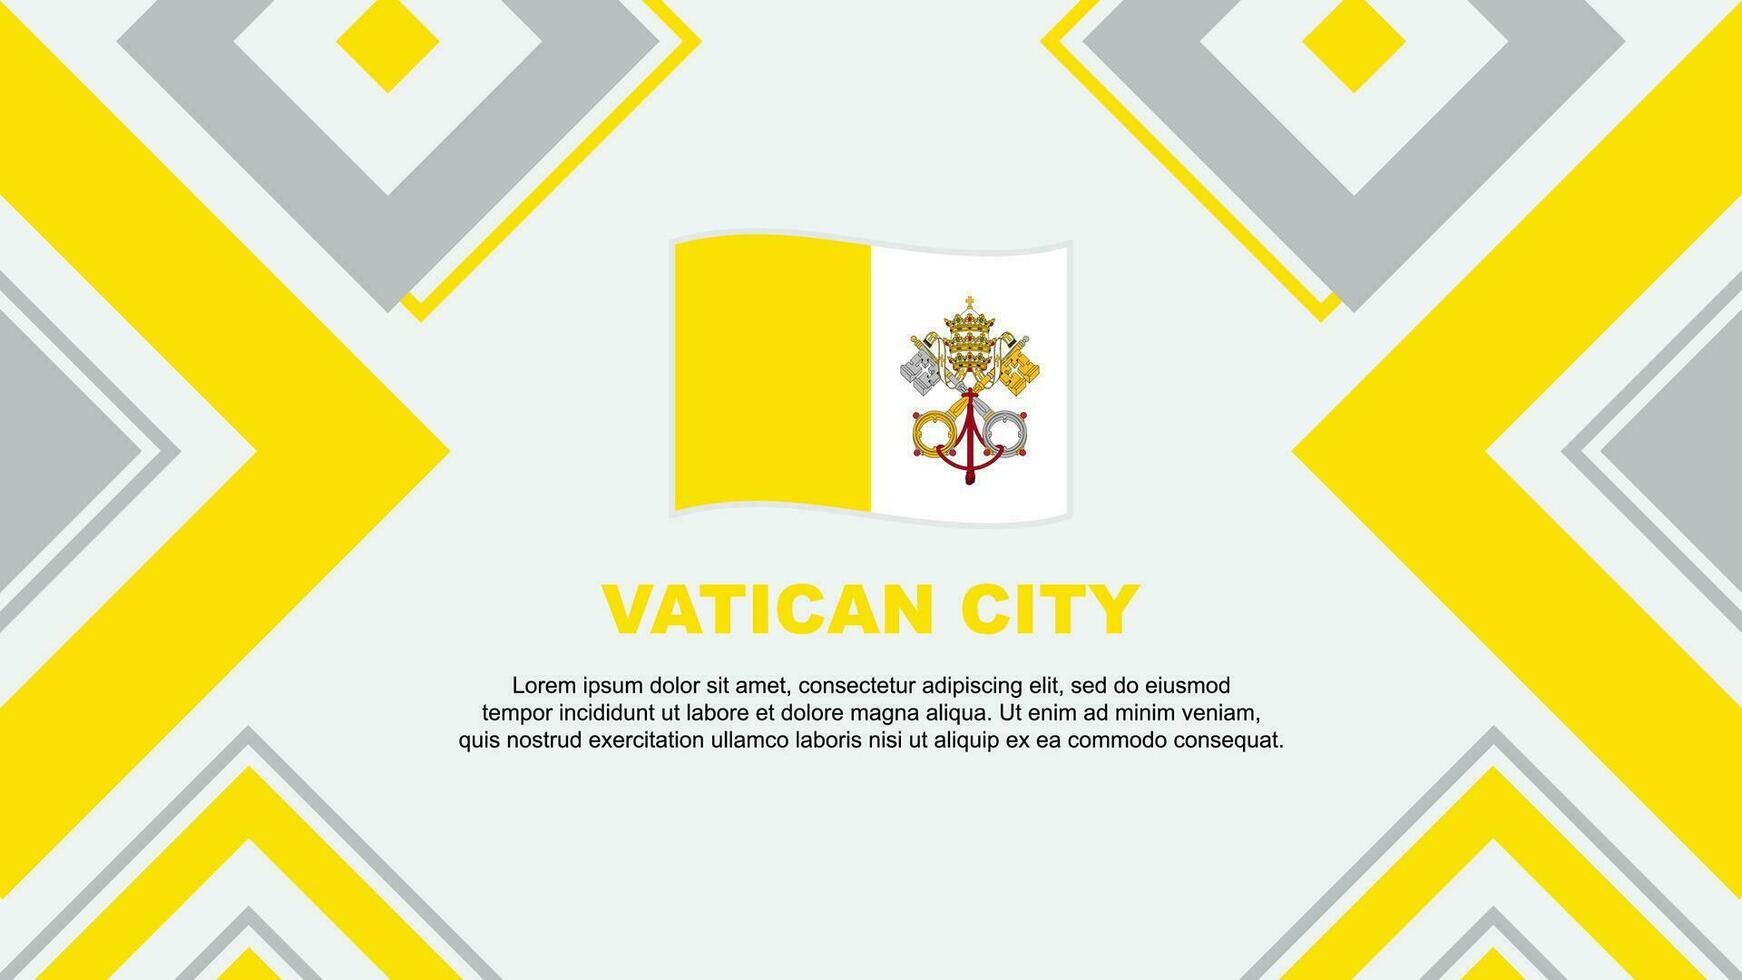 Vatican City Flag Abstract Background Design Template. Vatican City Independence Day Banner Wallpaper Vector Illustration. Vatican City Independence Day